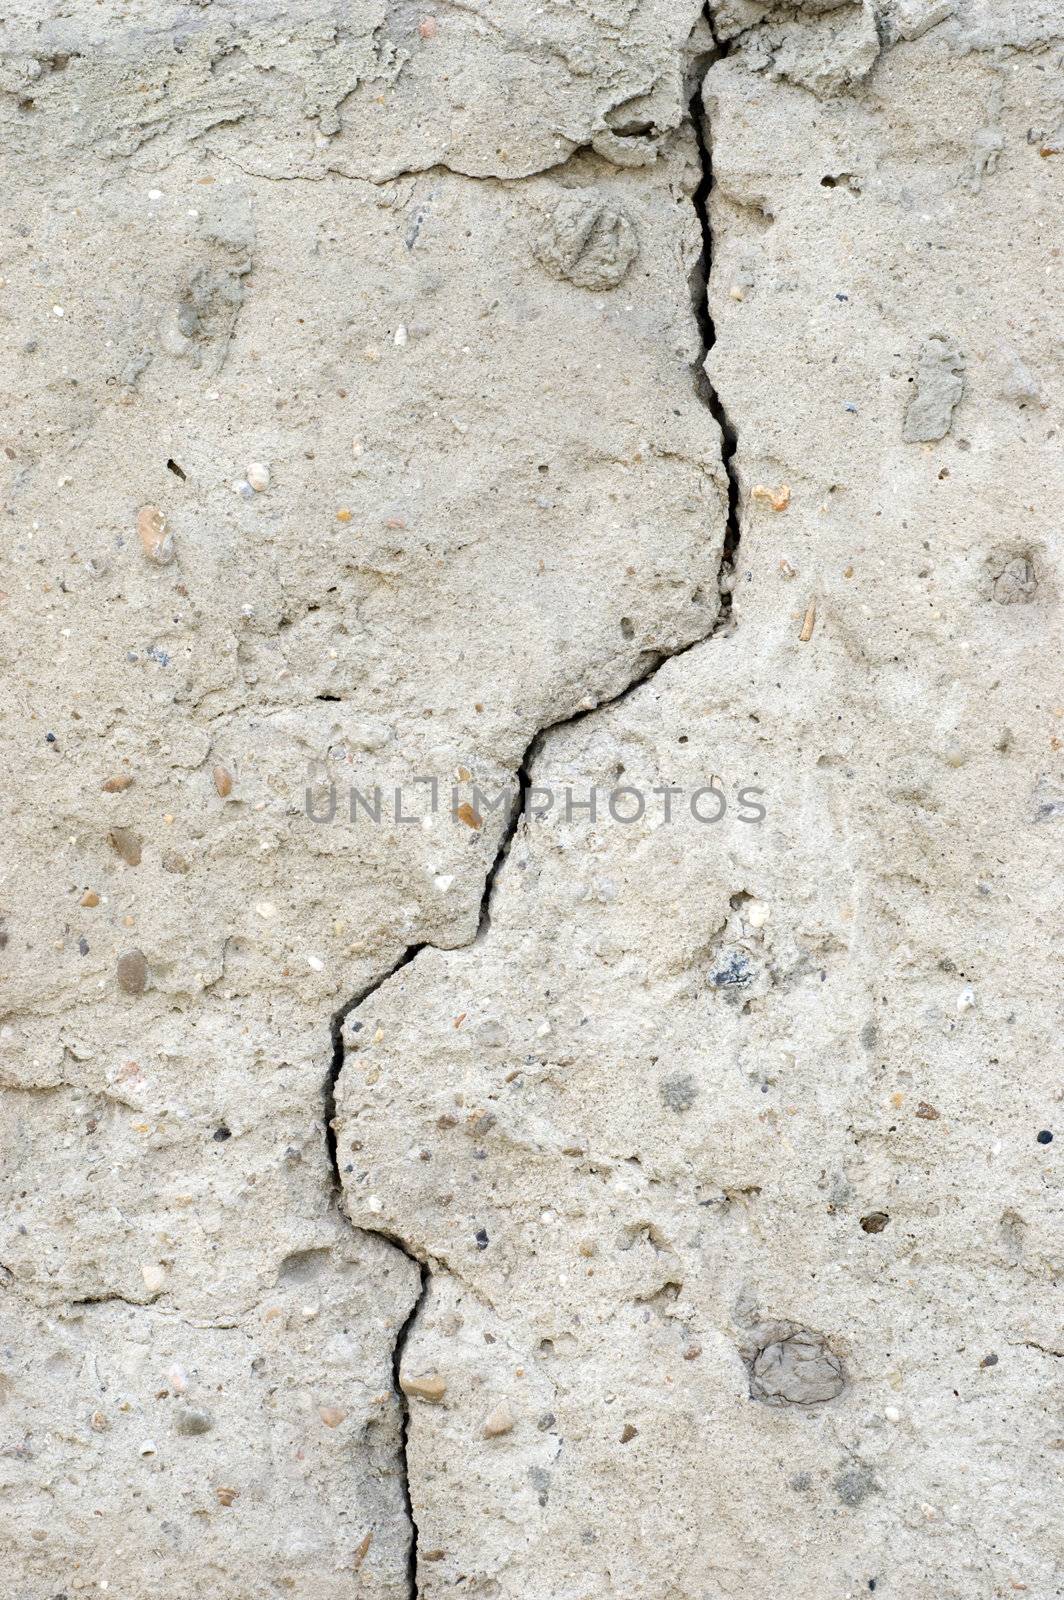 limesone wall terxtured surface, also suitable to use as displacement map or backdrop